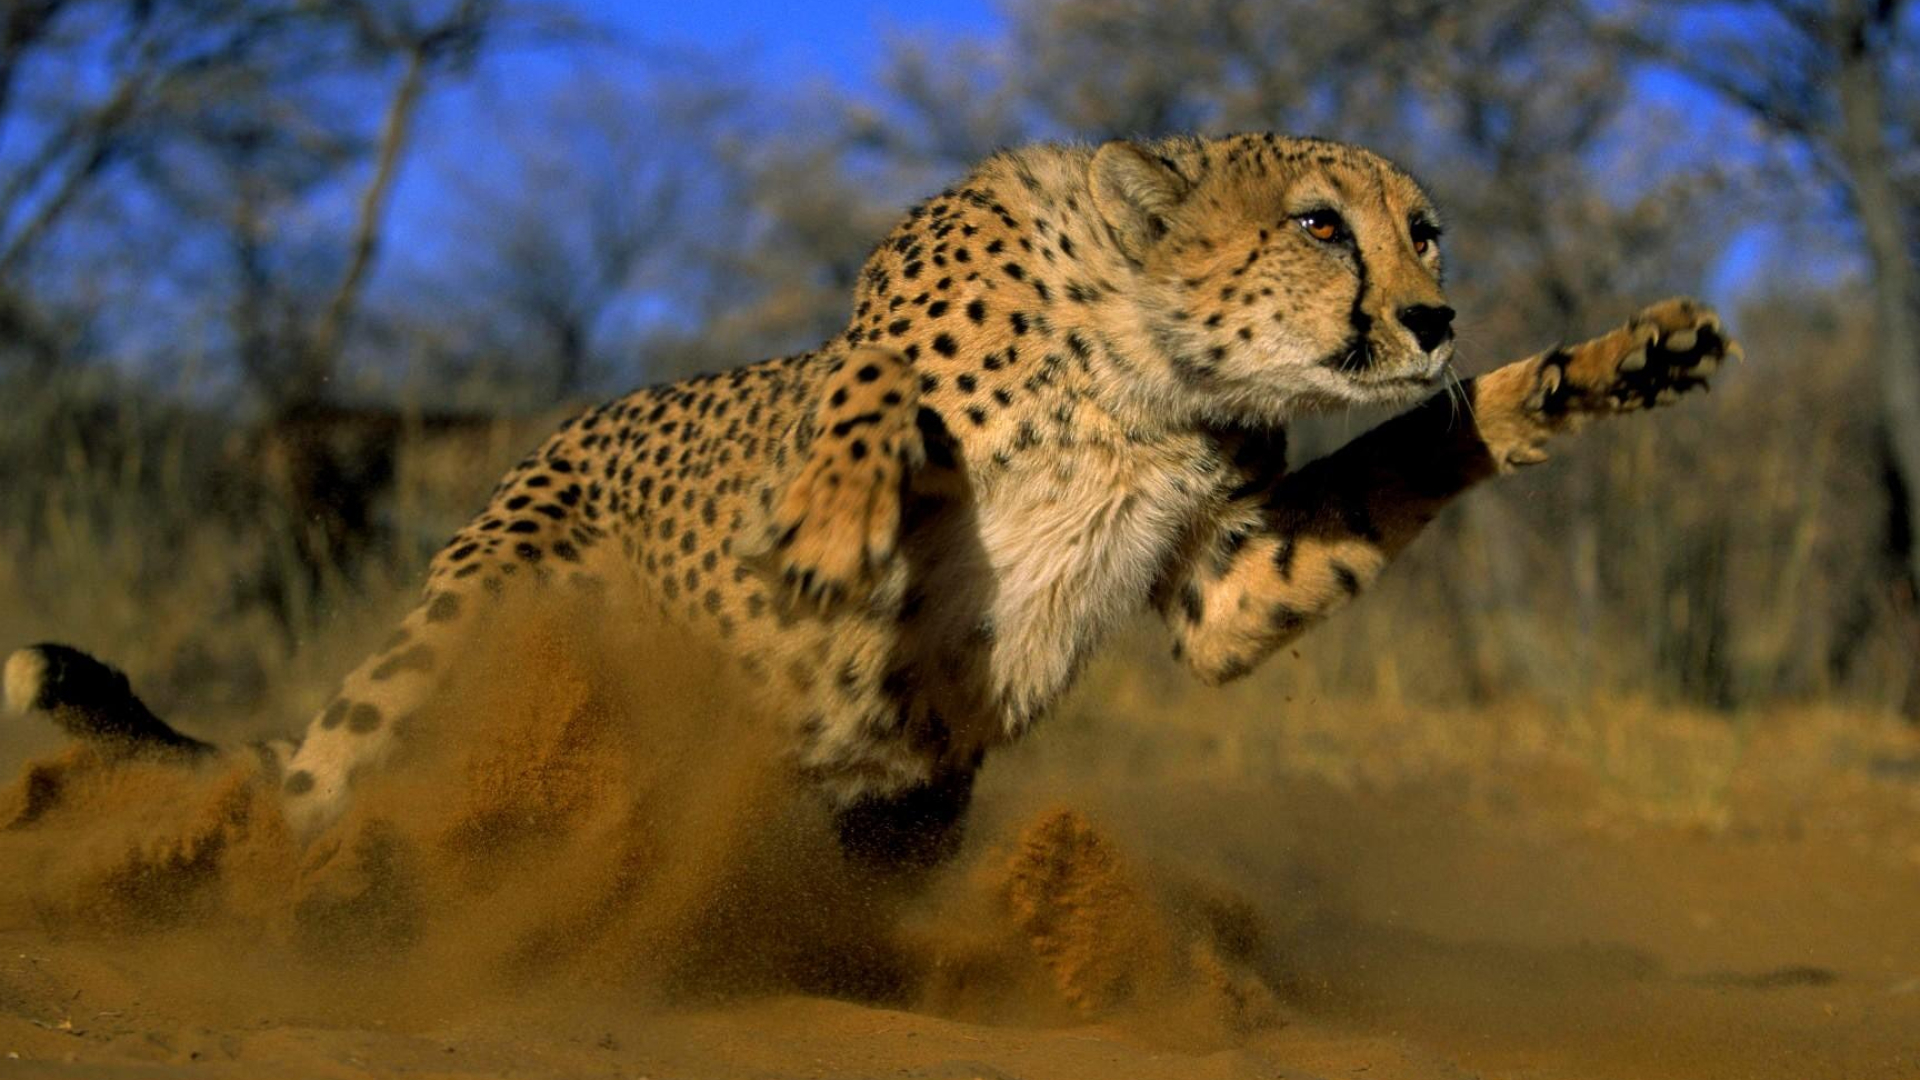 1920x1080 Download Animals cheetahs wild cats awesome wallpaper Birds- For Mobile Phone